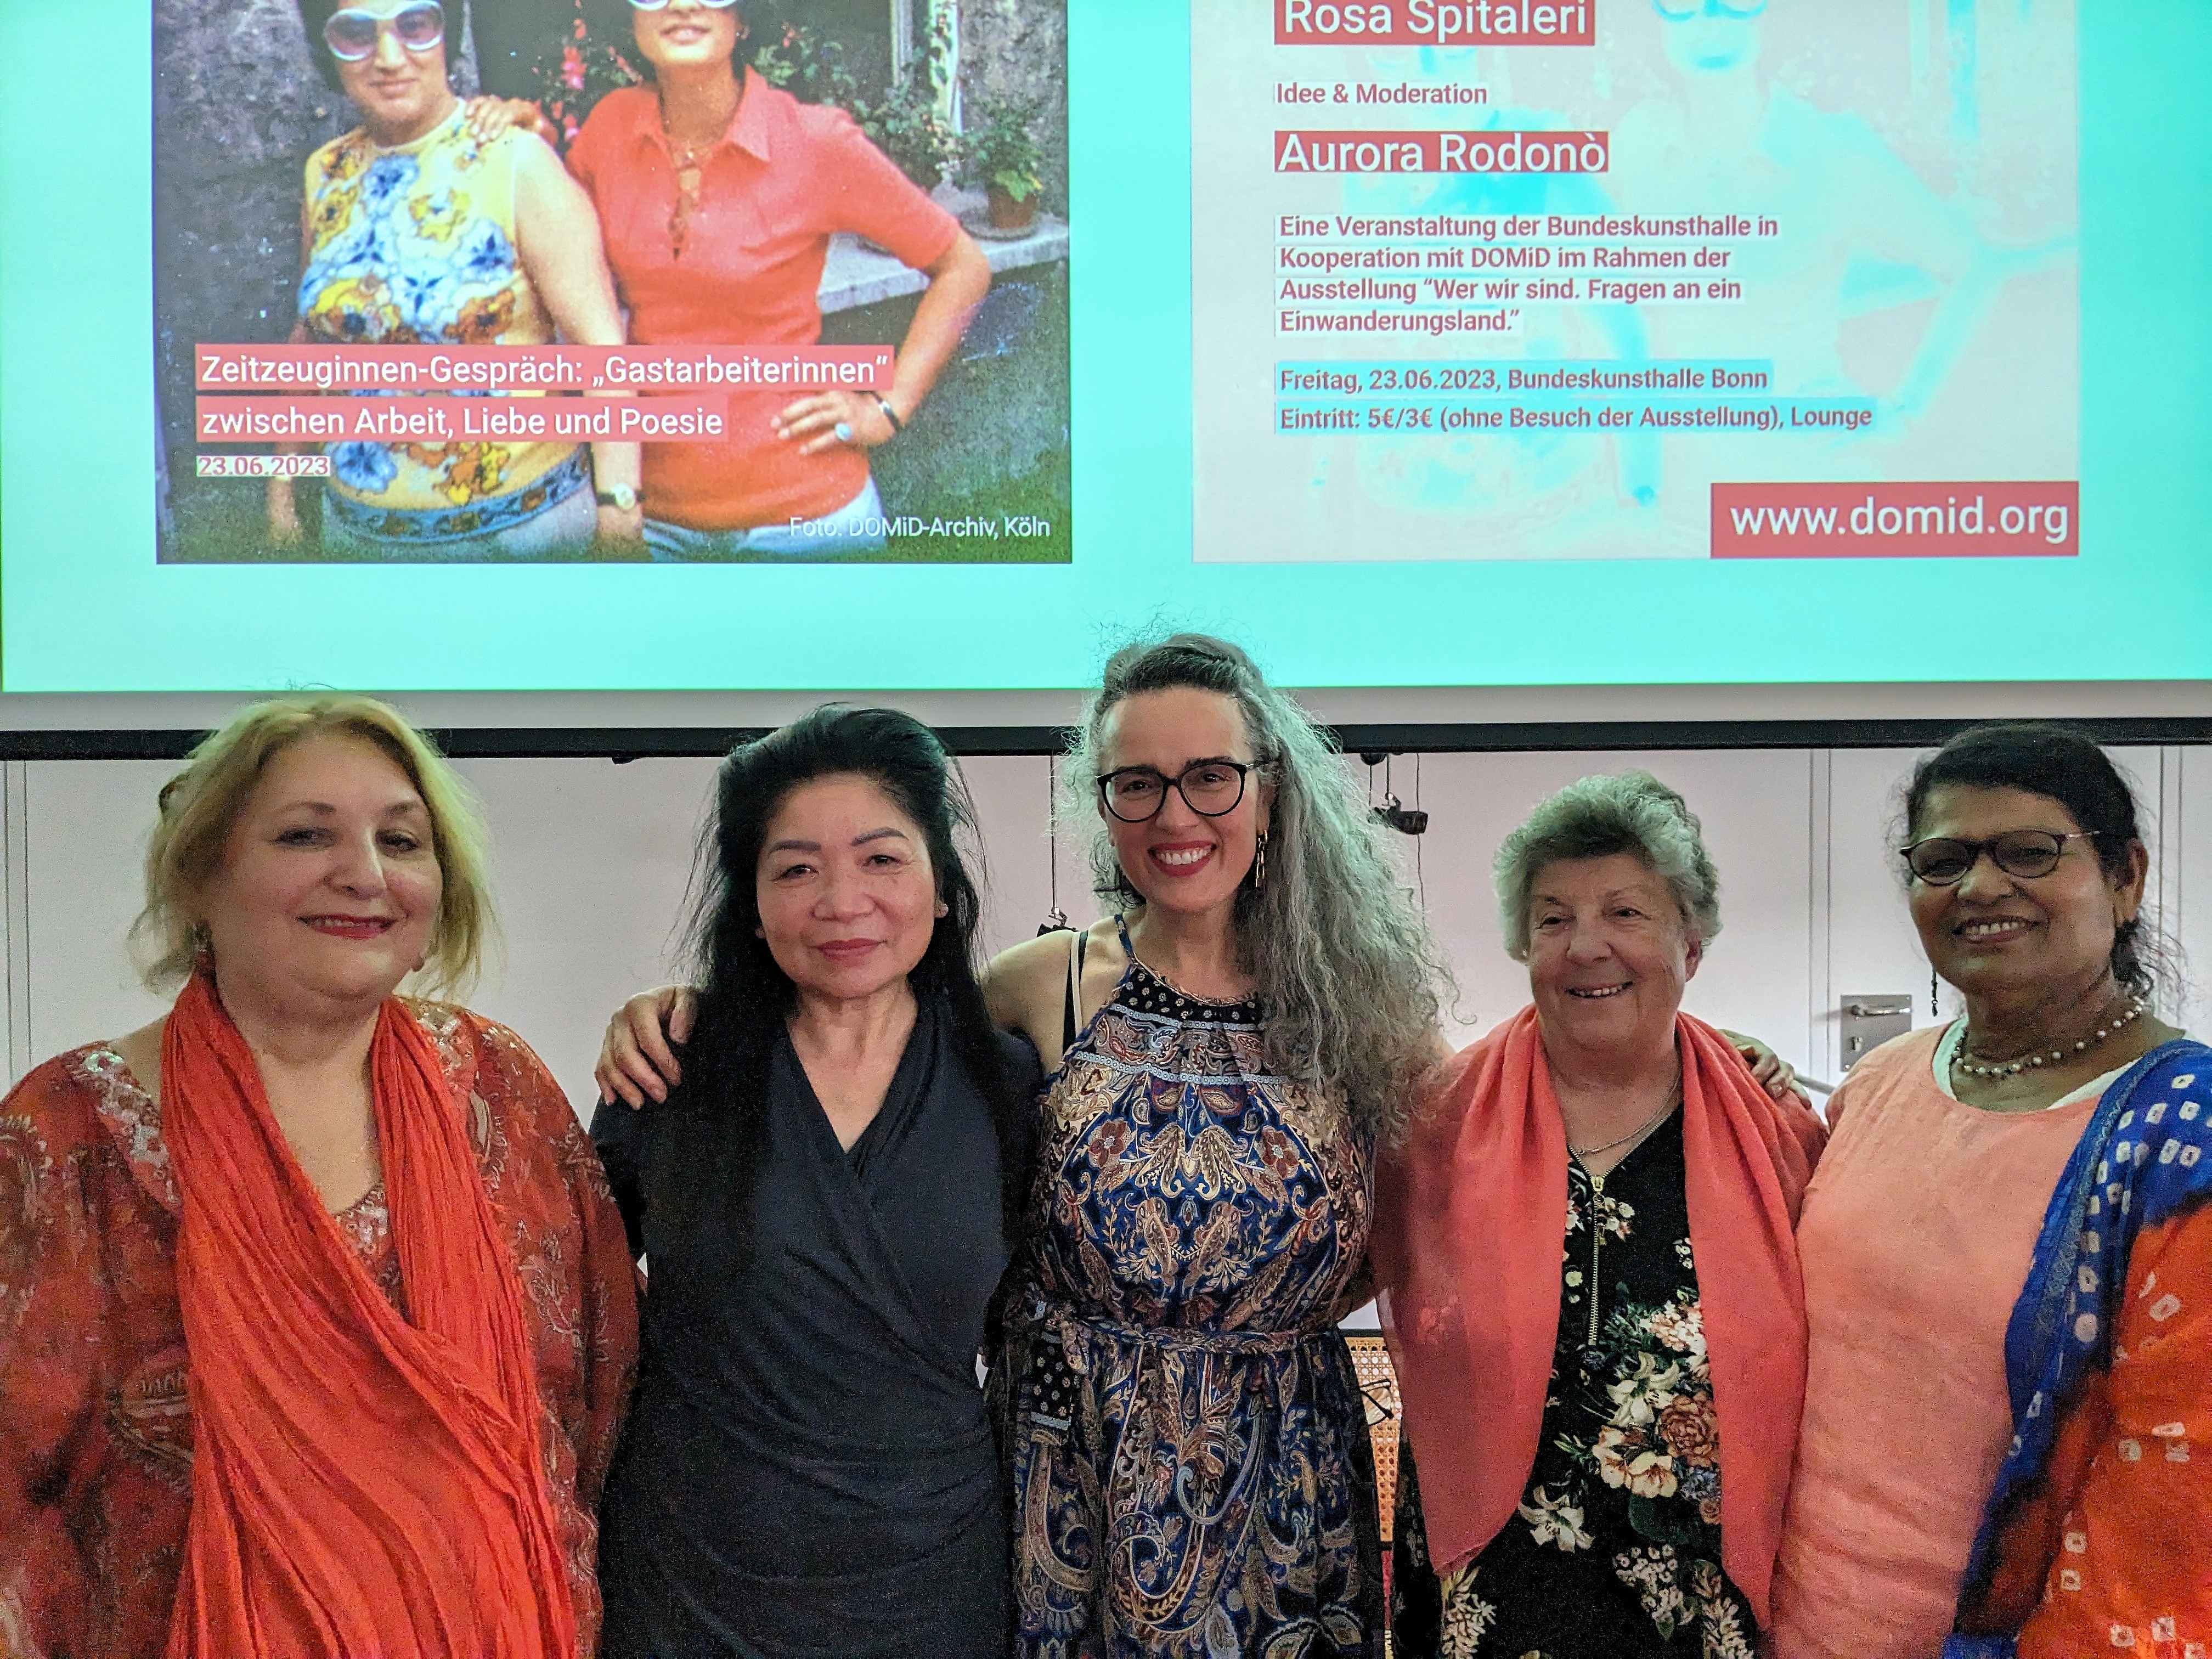 The protagonists of the evening, from left to right: Rosa Spitaleri, Mai Phương Kollath, moderator Aurora Rodonò, Asimina Paradissa, Veronca Oommen. Photo: DOMiD Archive, Cologne